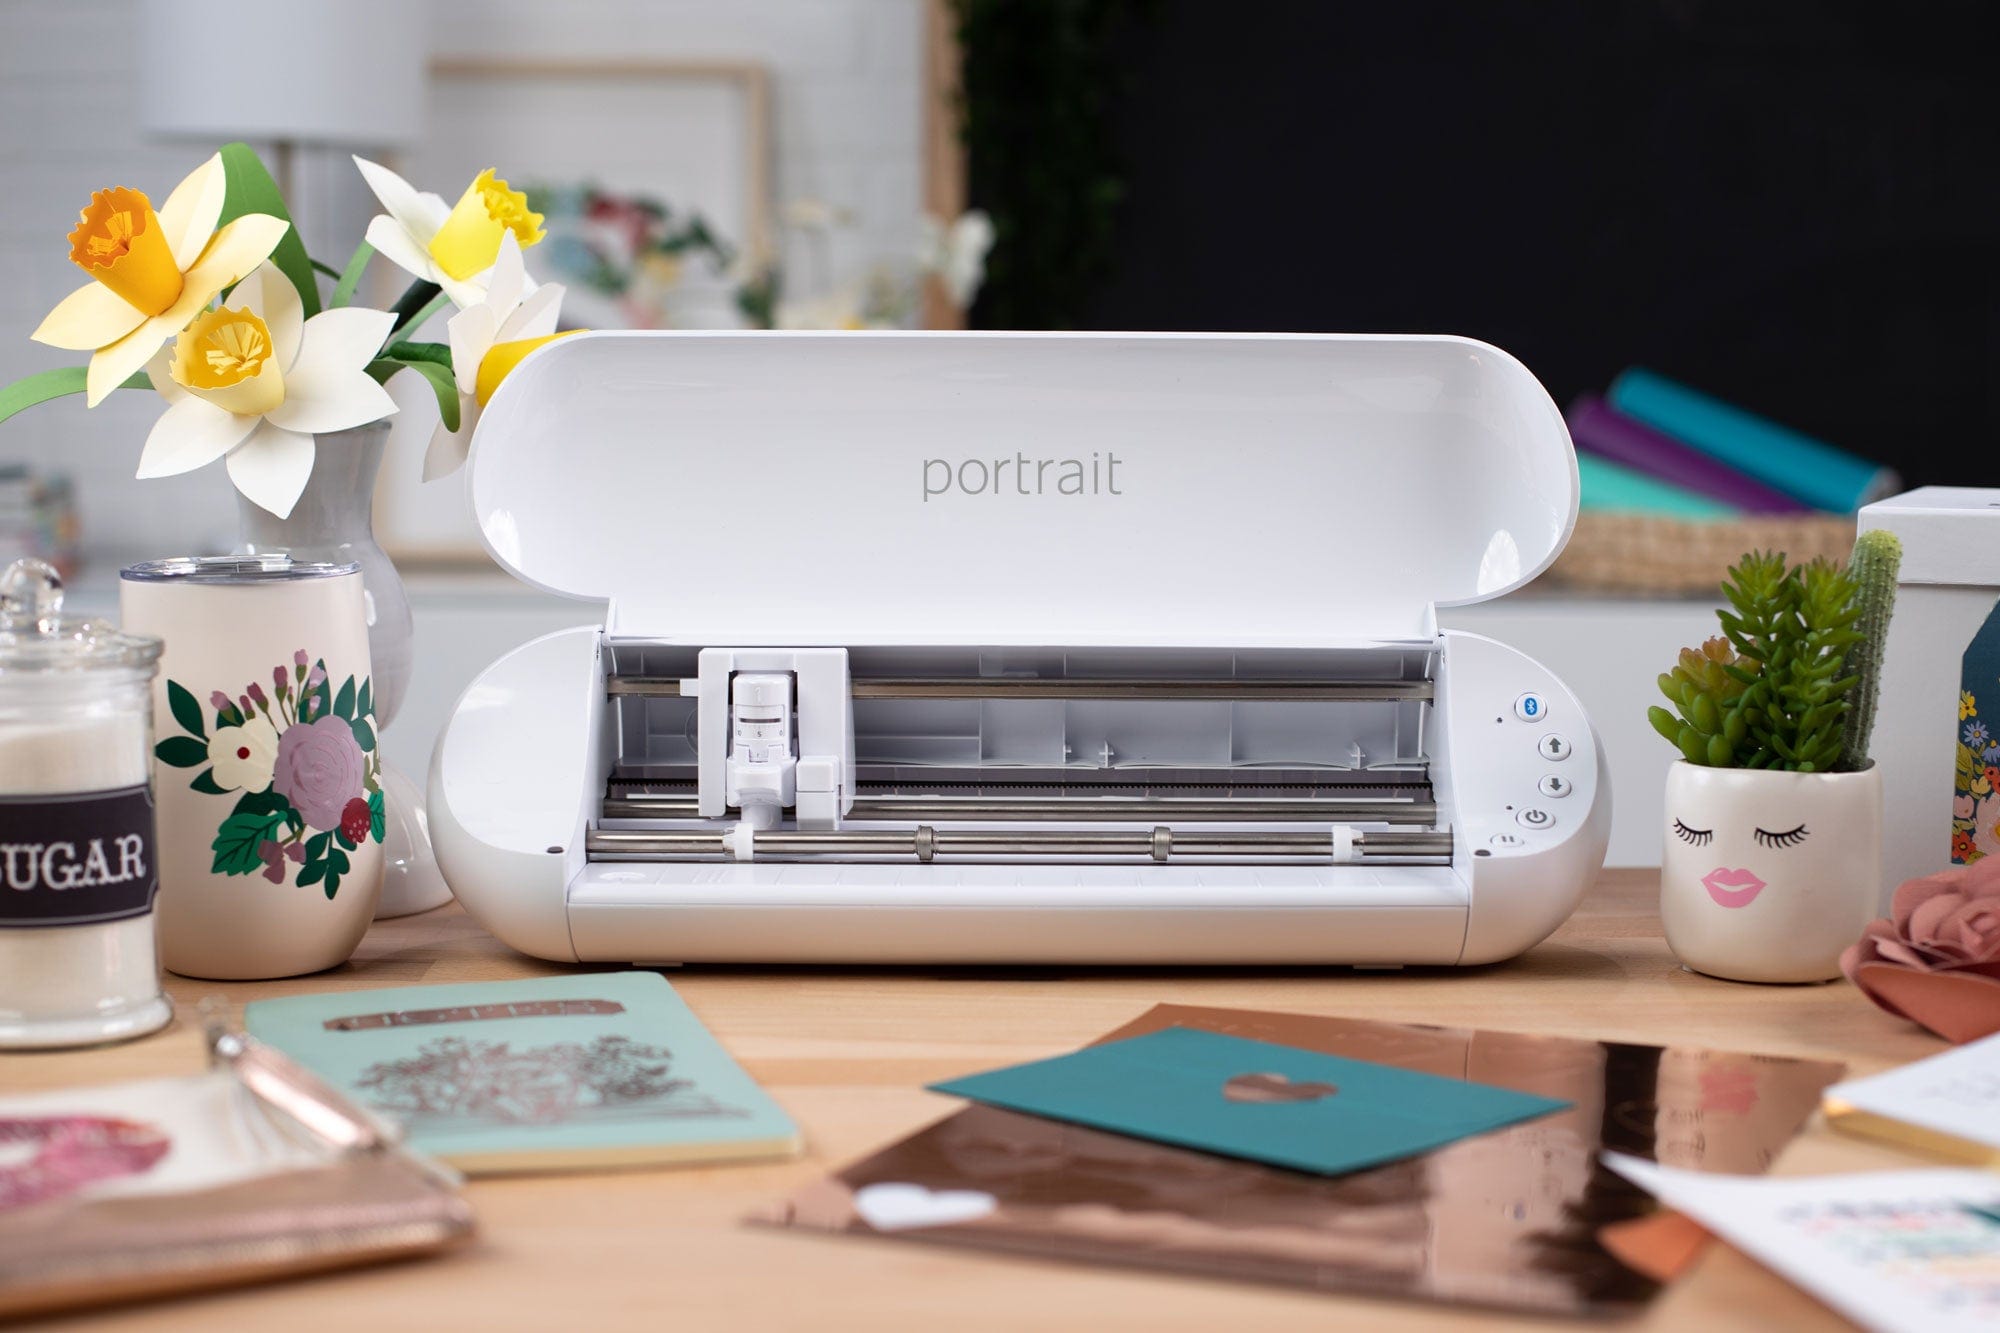 Silhouette Portrait® 3 Portable Electronic Cutting Tool